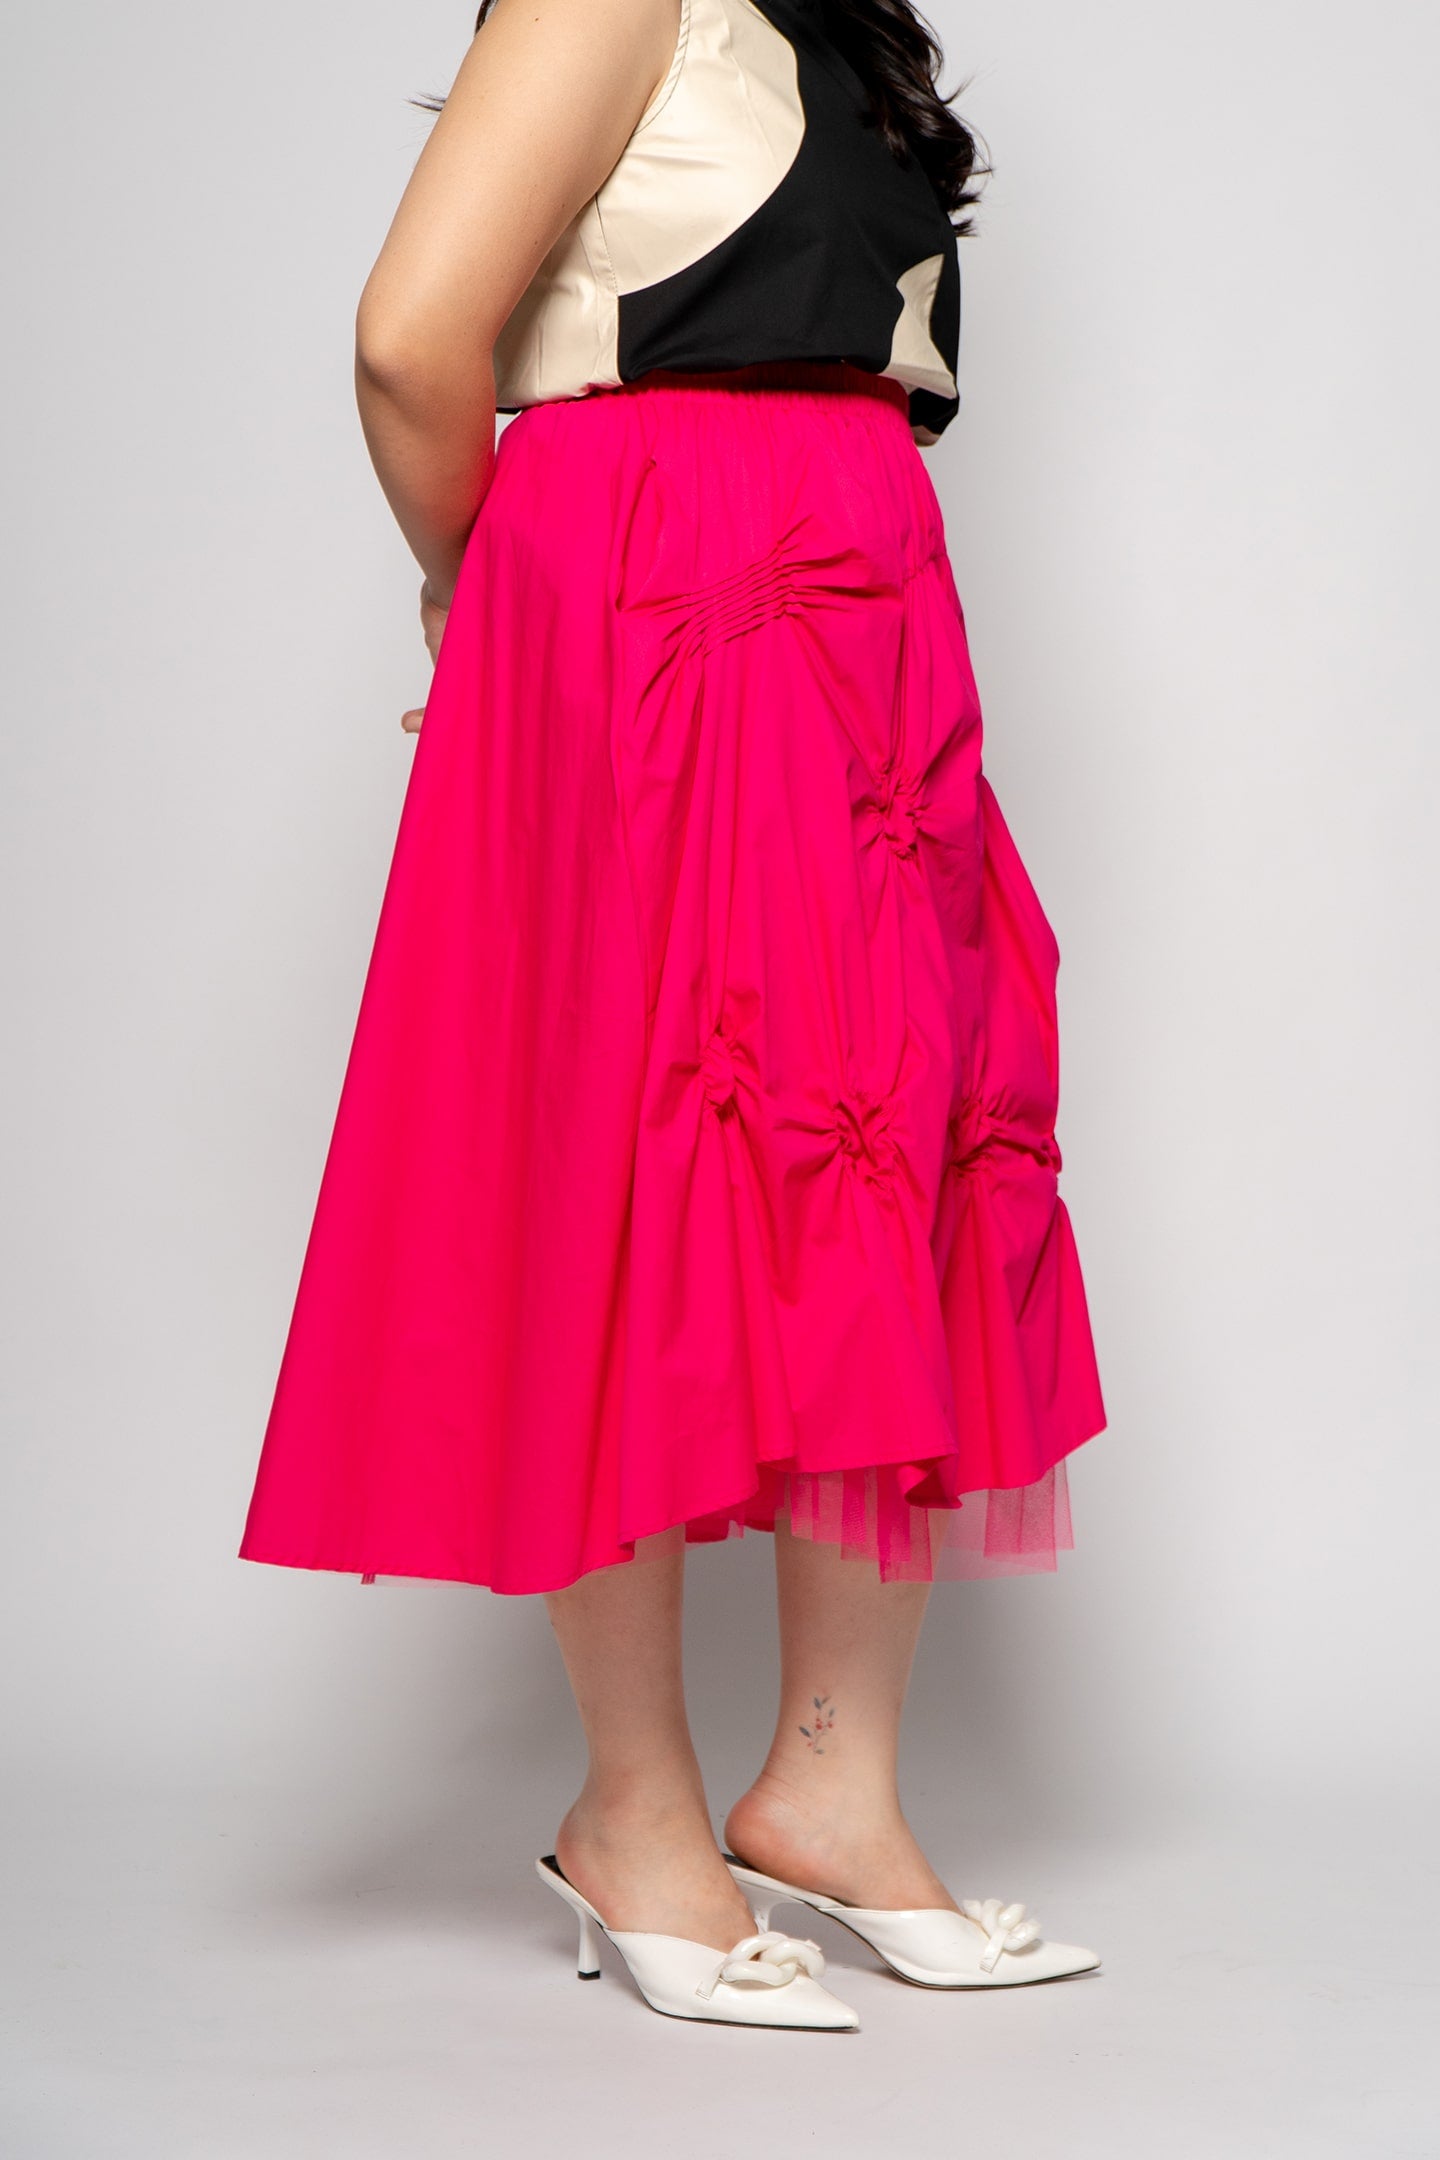 Xanthe Skirt in Pink